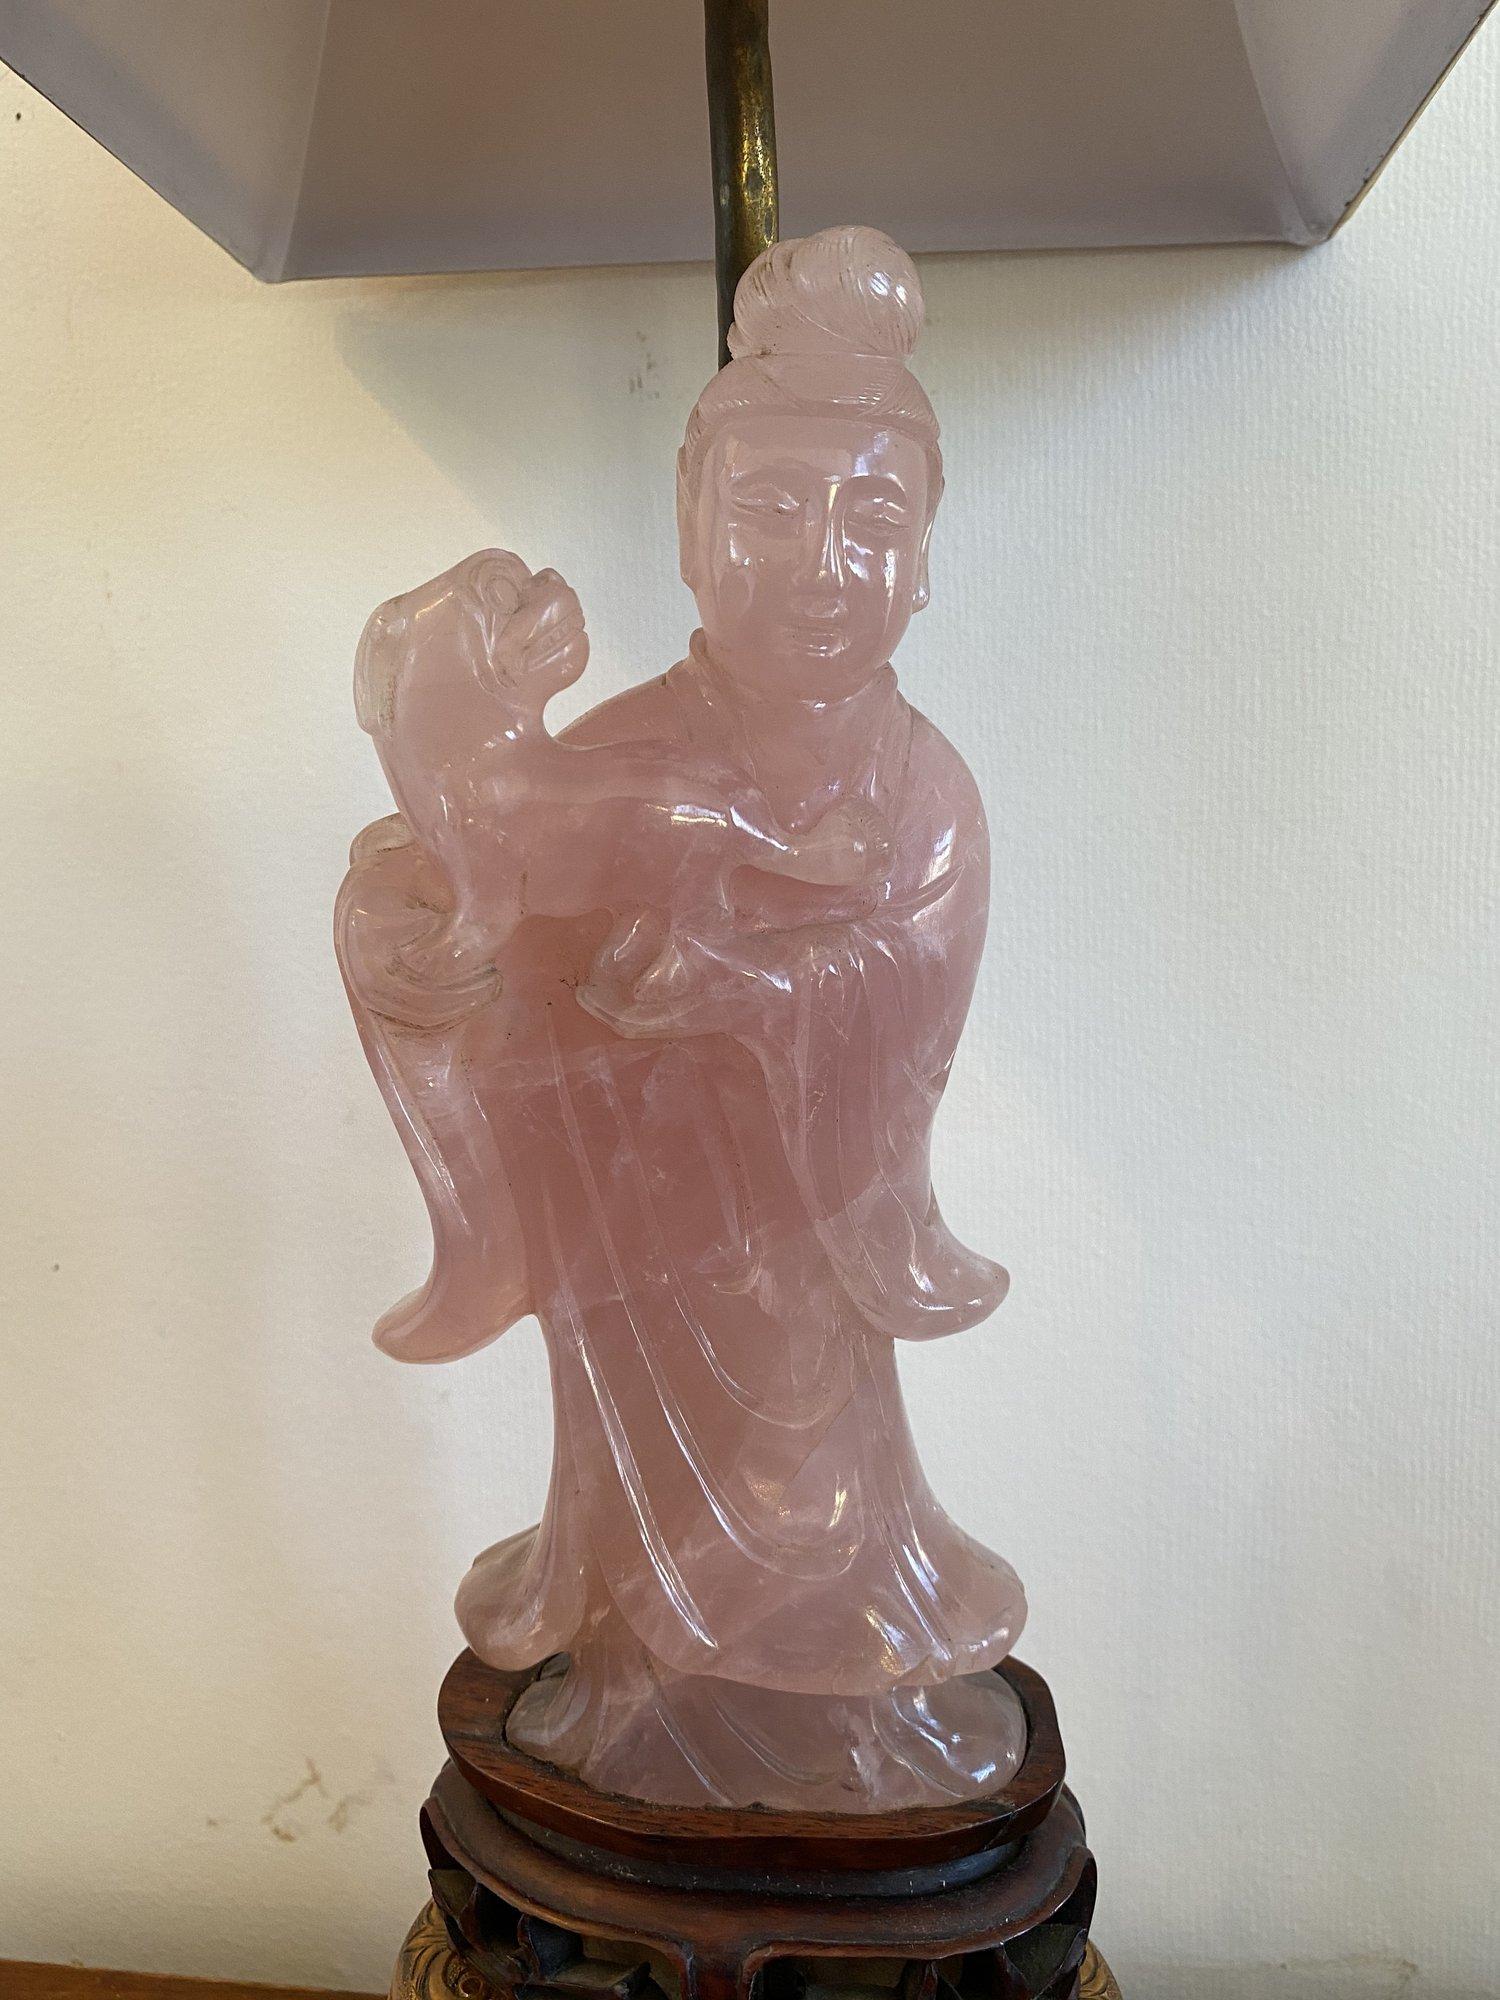 19th century Chinese carved rose quartz figure mounted as a lamp, depicting Guanyin holding a foo dog; mounted on a carved openwork wooden base, then mounted on a repousse metal base. Silk shade and large rose quartz finial. Dimensions of figure: